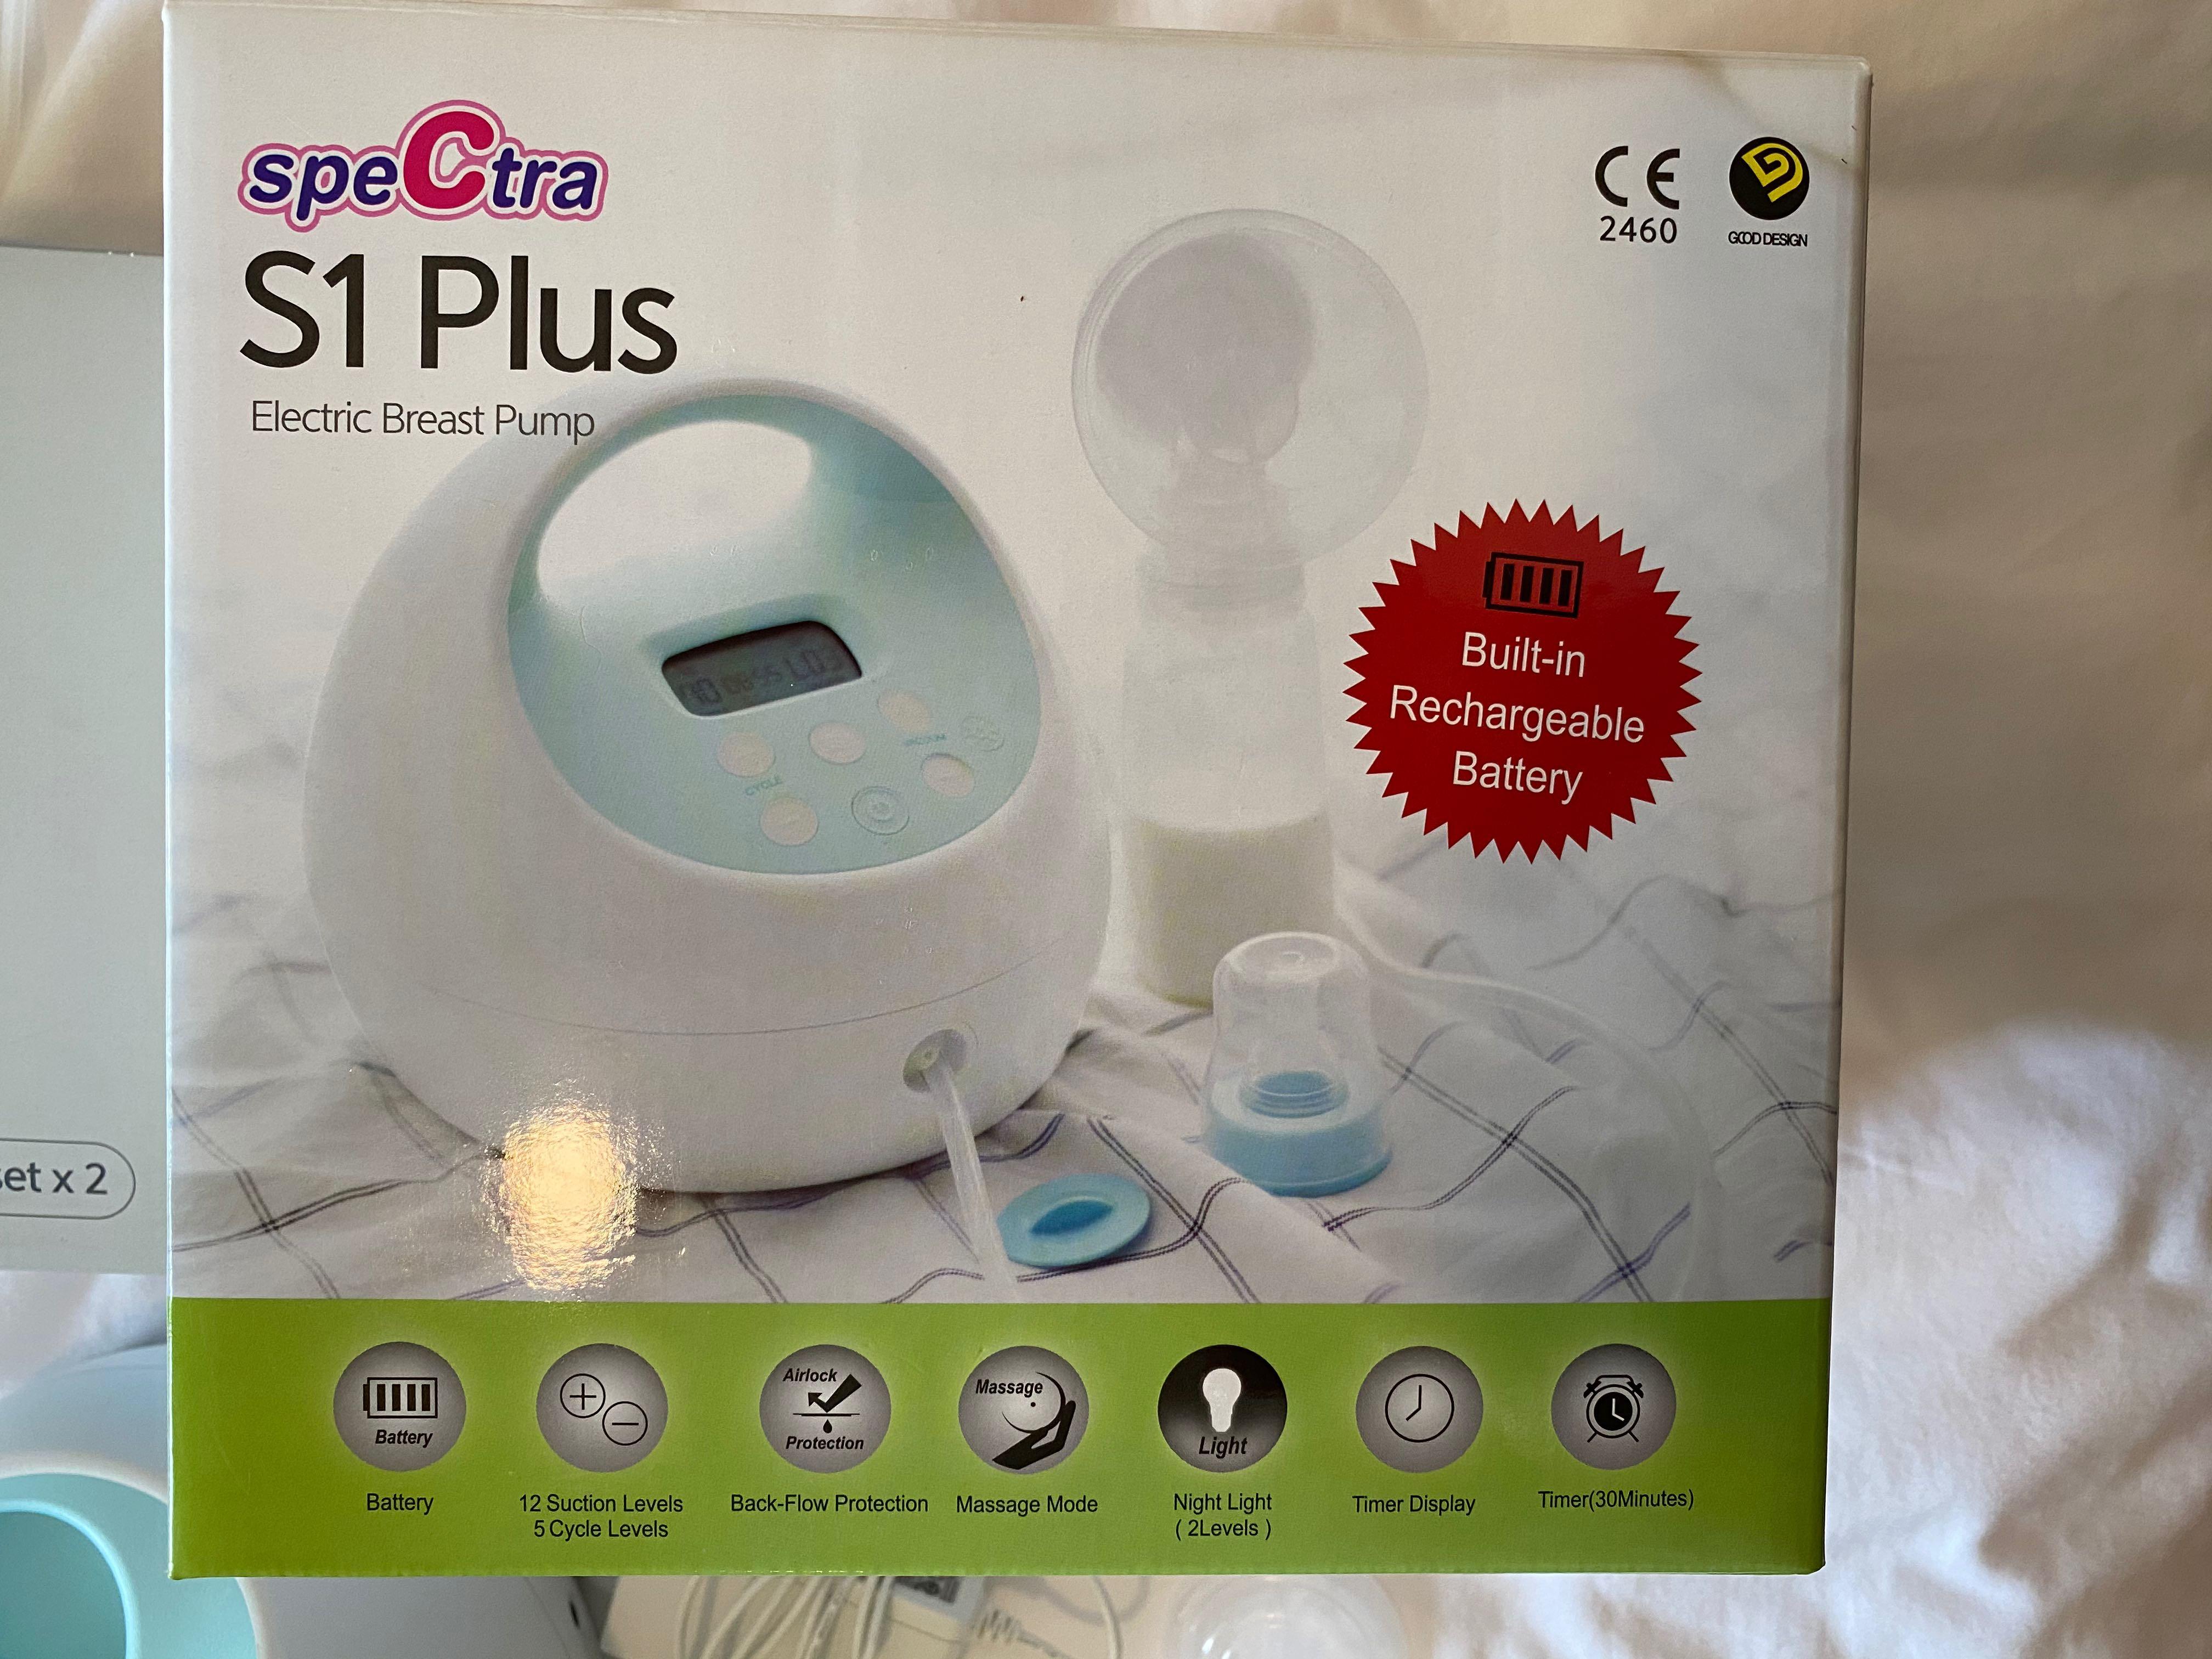 Full set! Spectra S1 Plus Electric Breast Pump and brand new